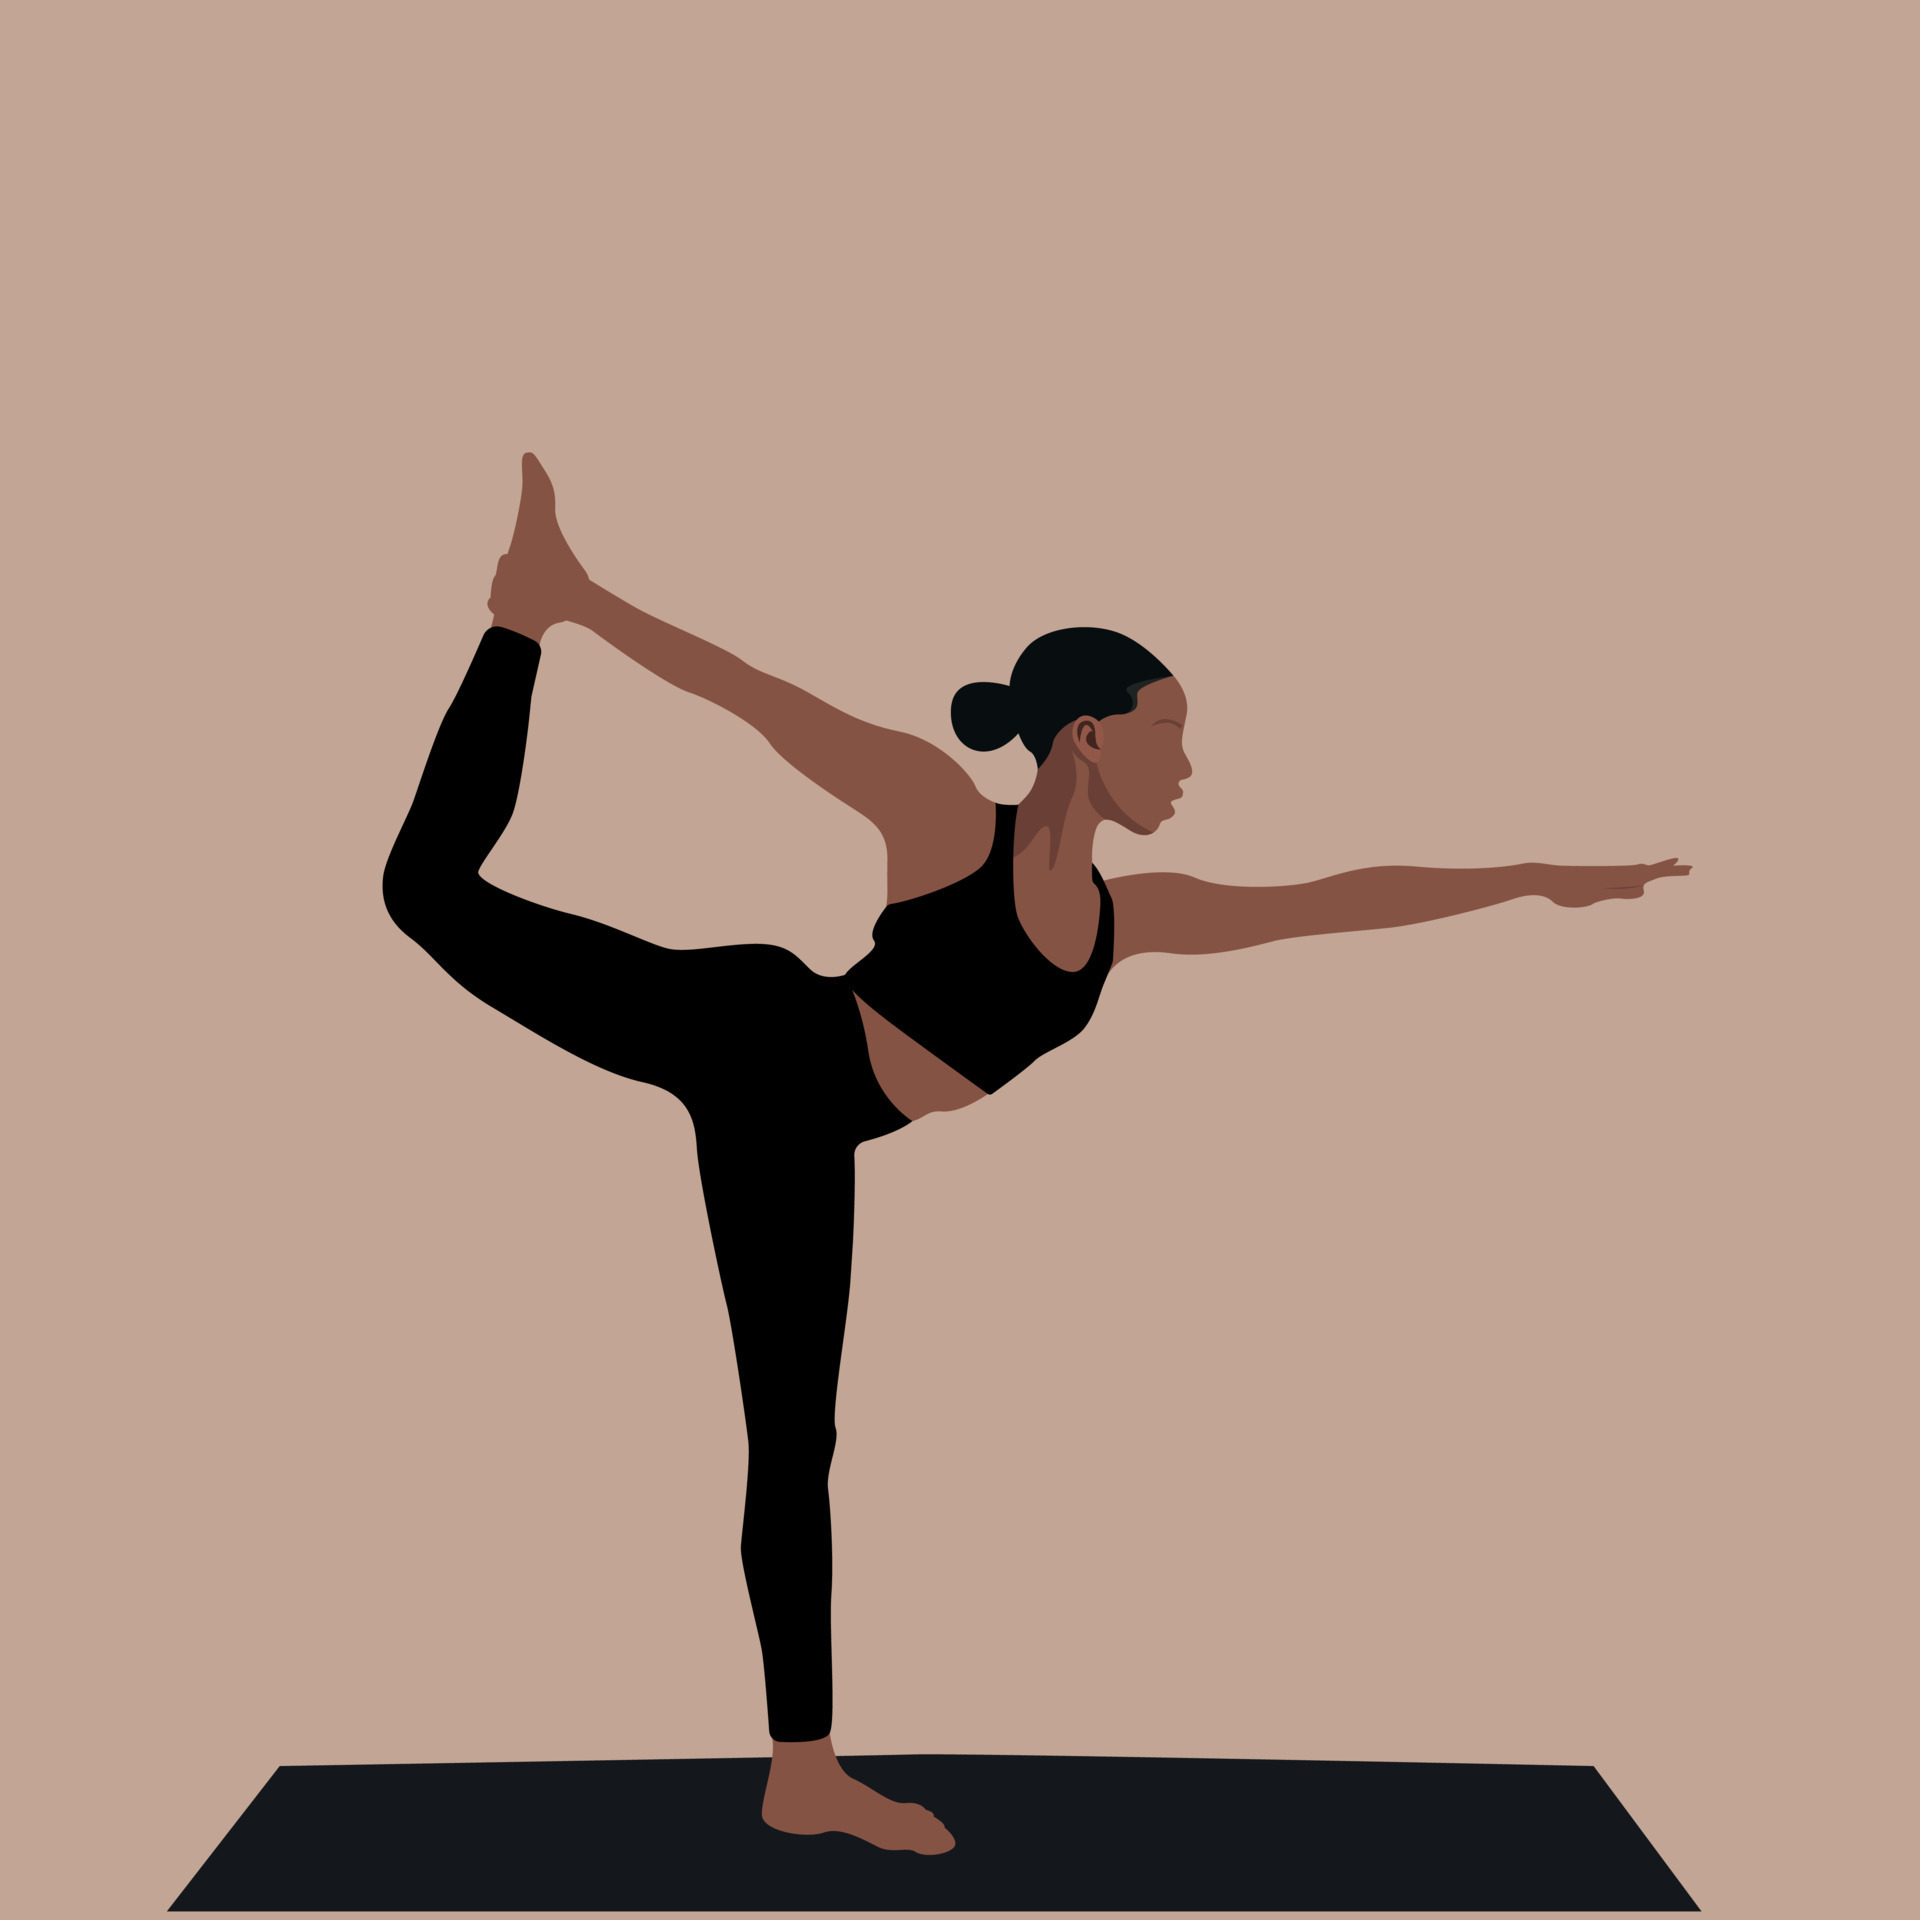 https://static.vecteezy.com/system/resources/previews/008/964/733/original/yoga-girl-african-american-woman-doing-yoga-poses-black-woman-natarajasana-yoga-pose-healthy-lifestyle-fashion-illustration-by-femininity-beauty-and-mental-health-pilates-fitness-vector.jpg